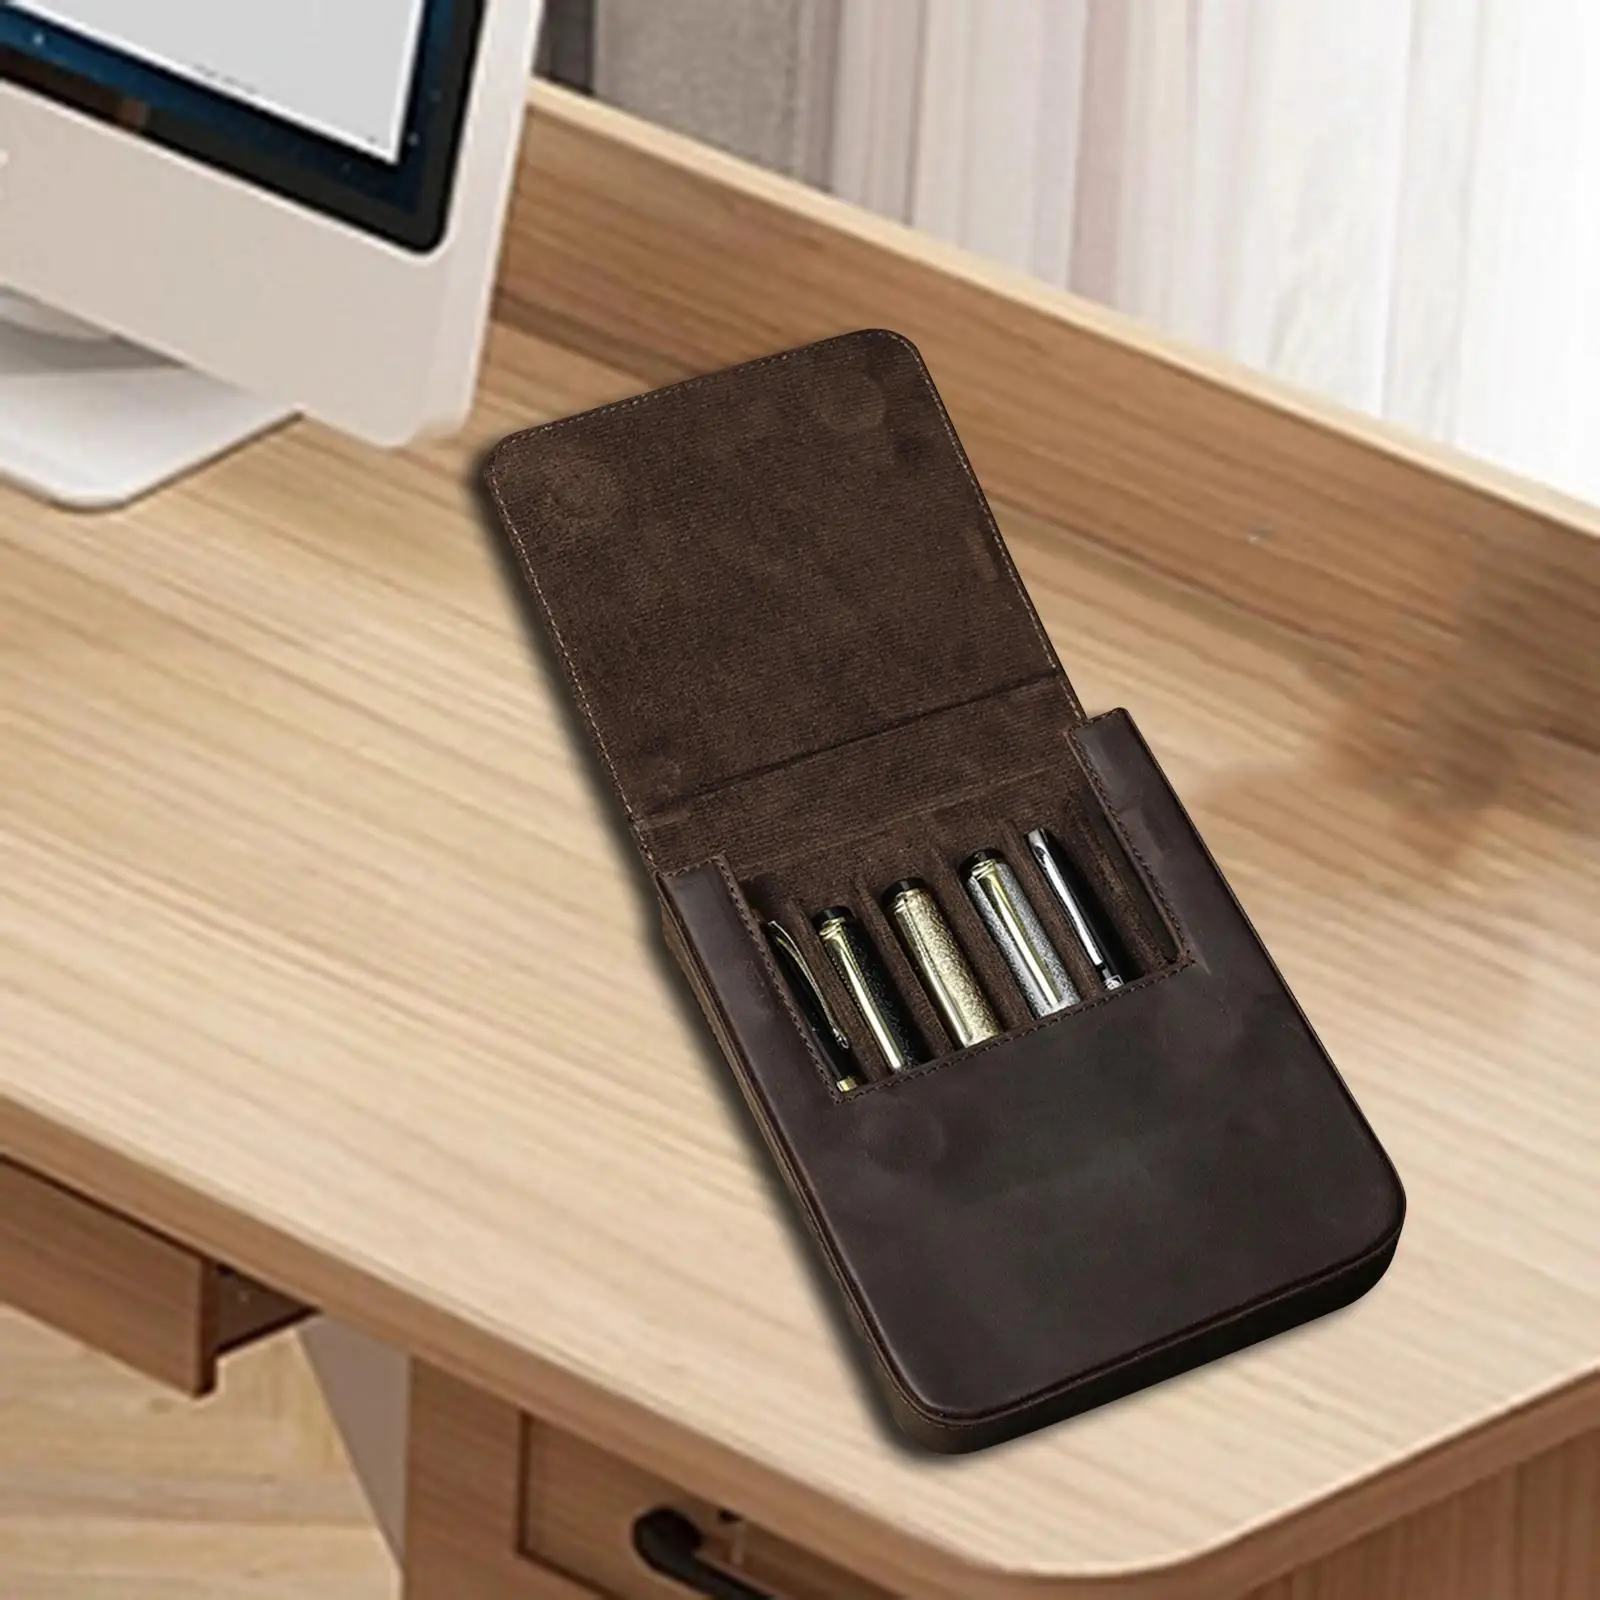 Pen Case 6 Slot Cases Gift PU Leather Organizer Accessories Stationery Bag Pen Bag for Husband Men Women School Meeting